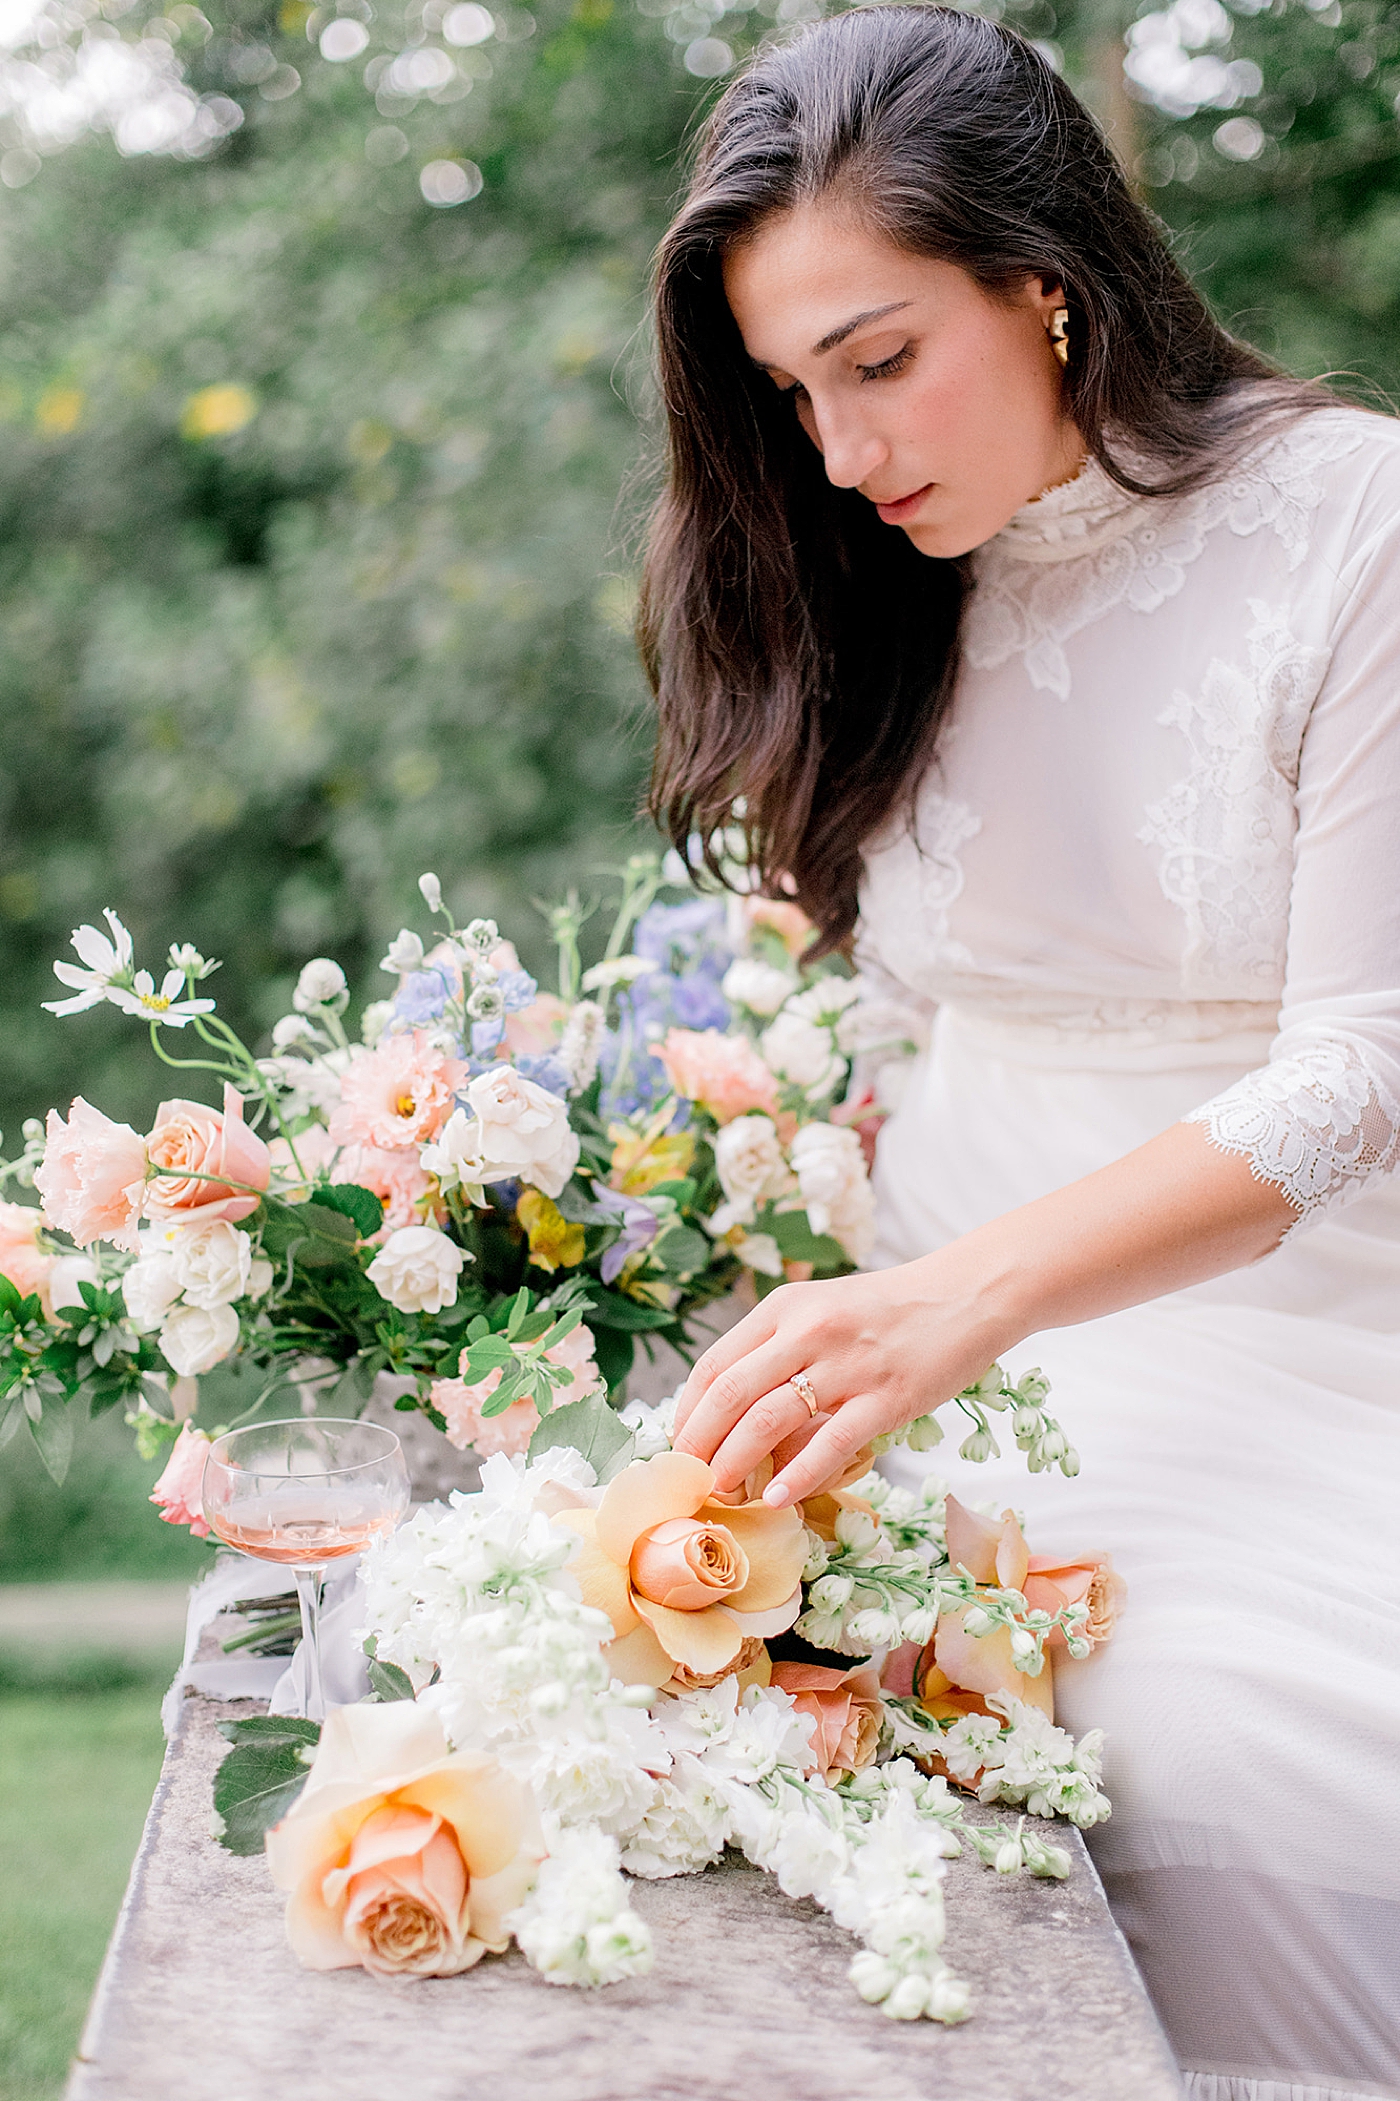 Bride in a white dress with wedding flowers in peaches and white | Image by Hope Helmuth Photography